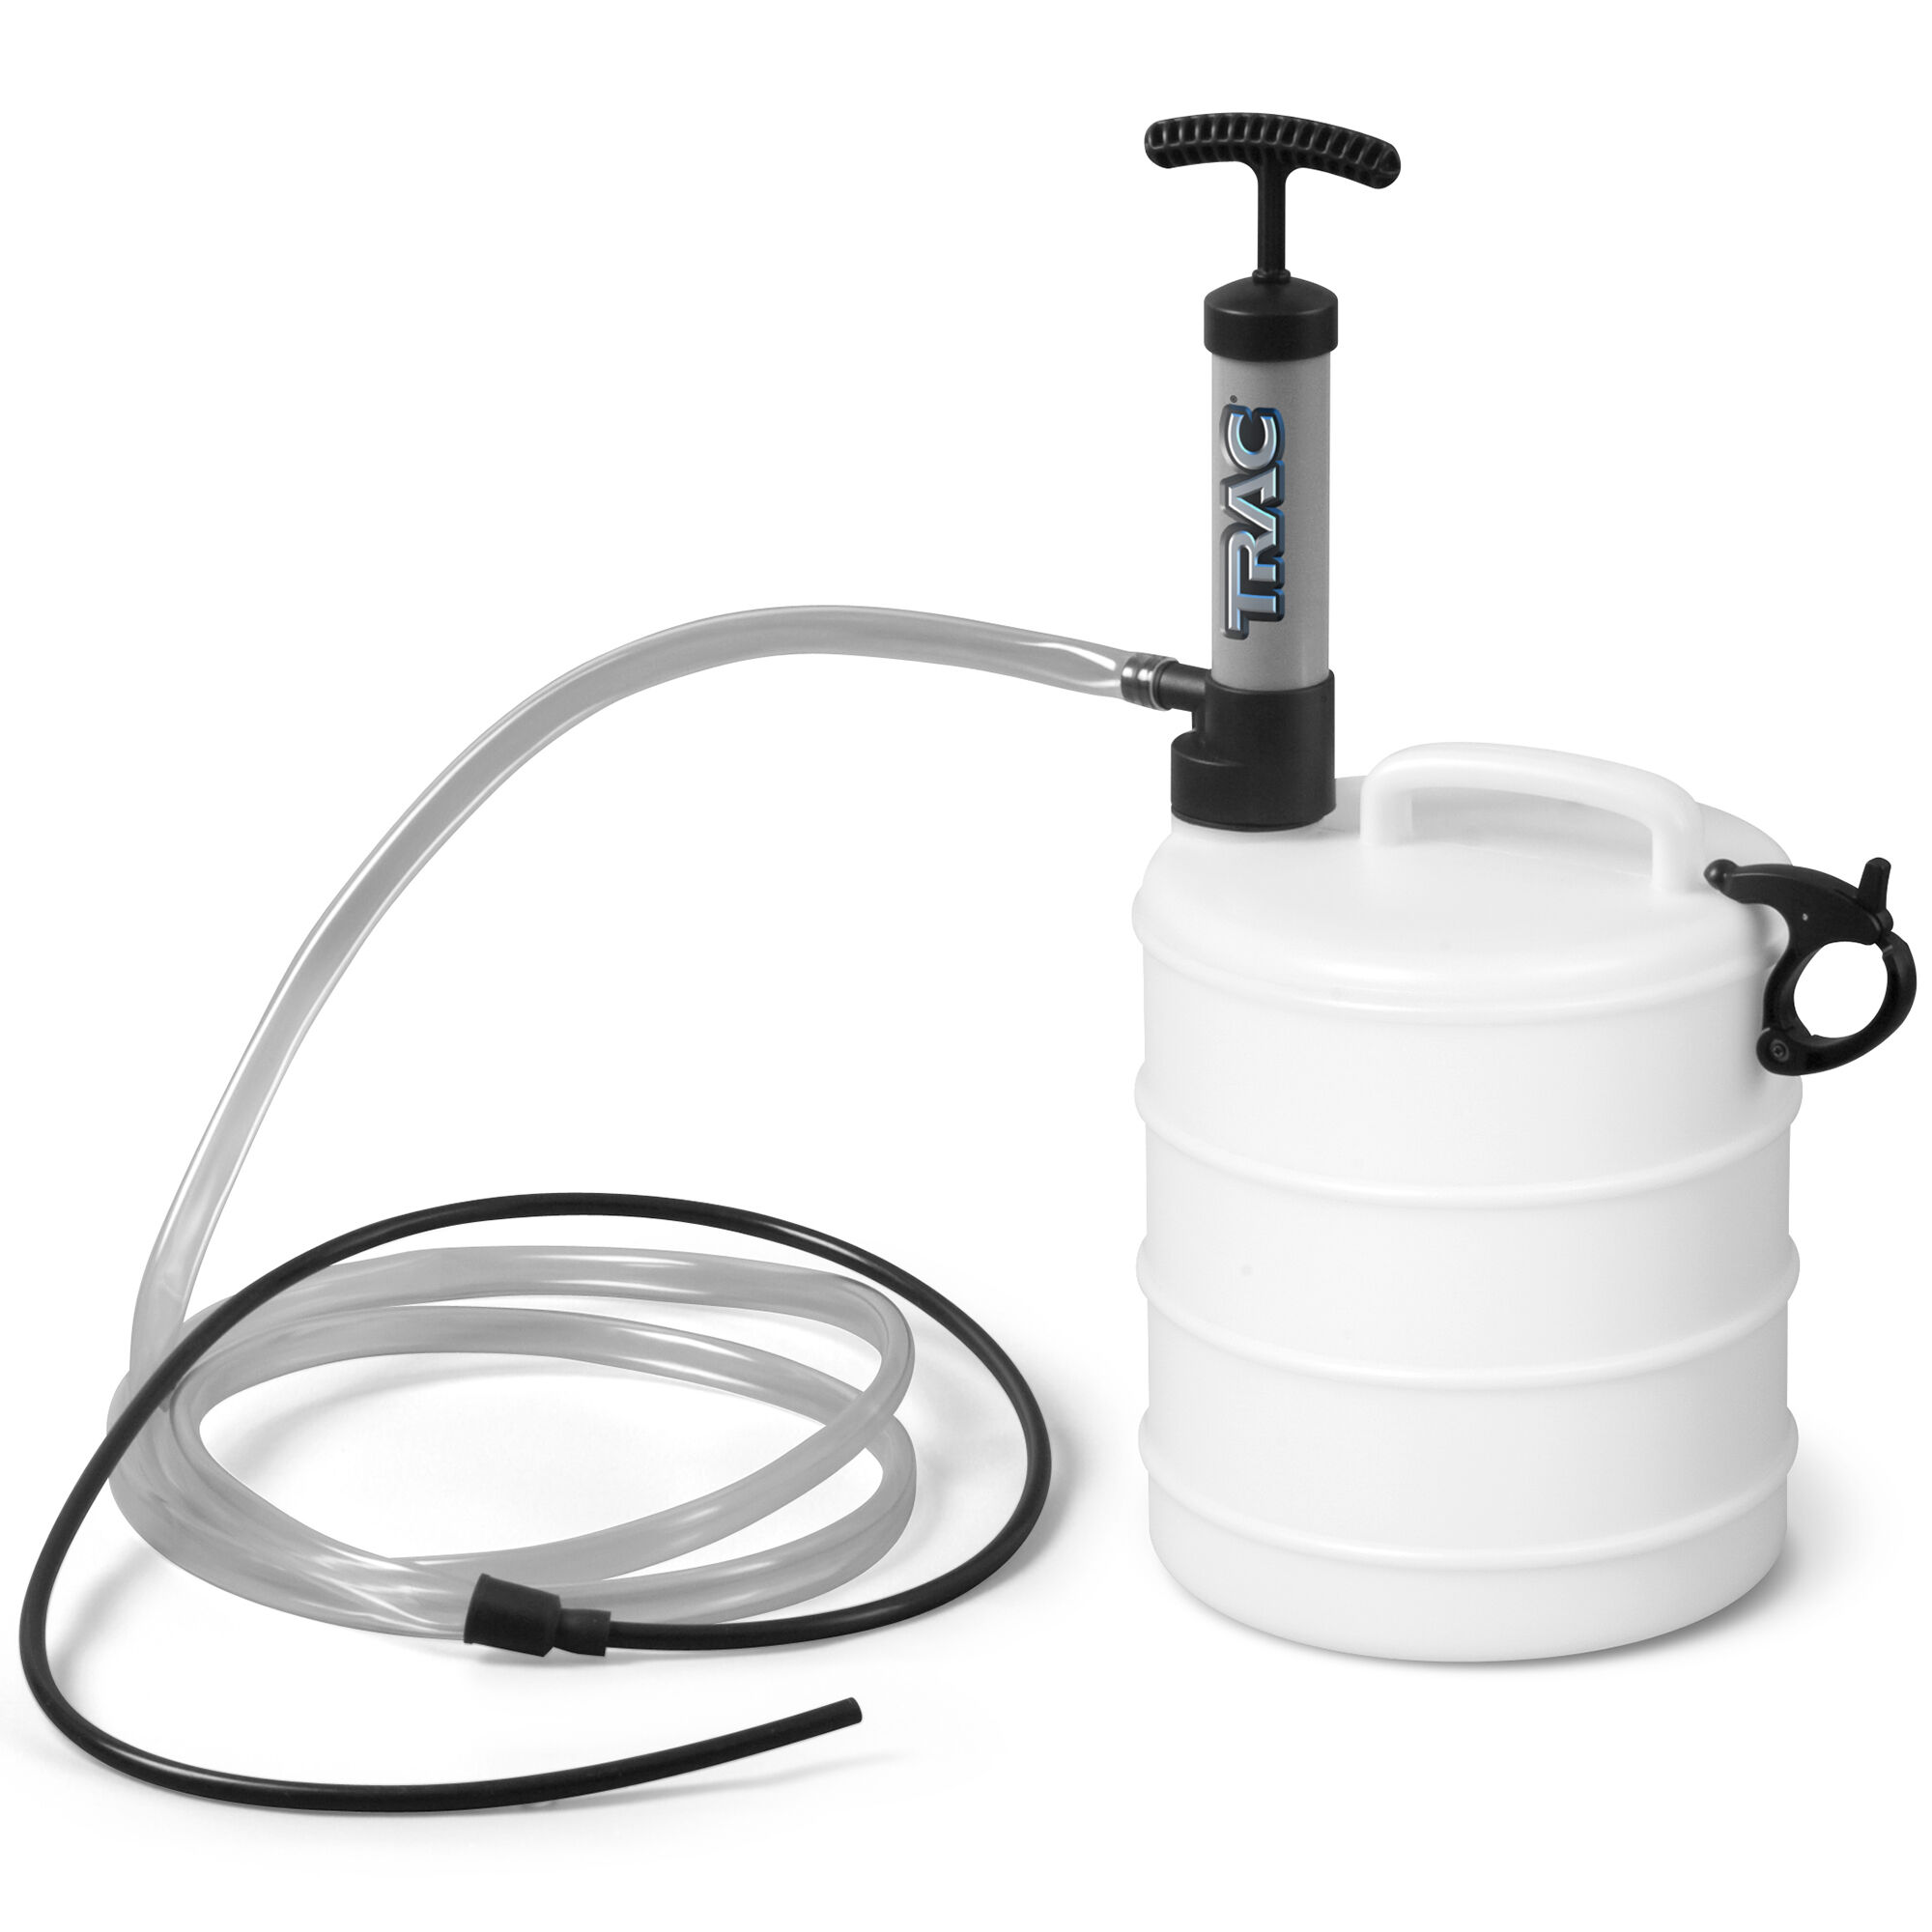 motive products power fluid extractor